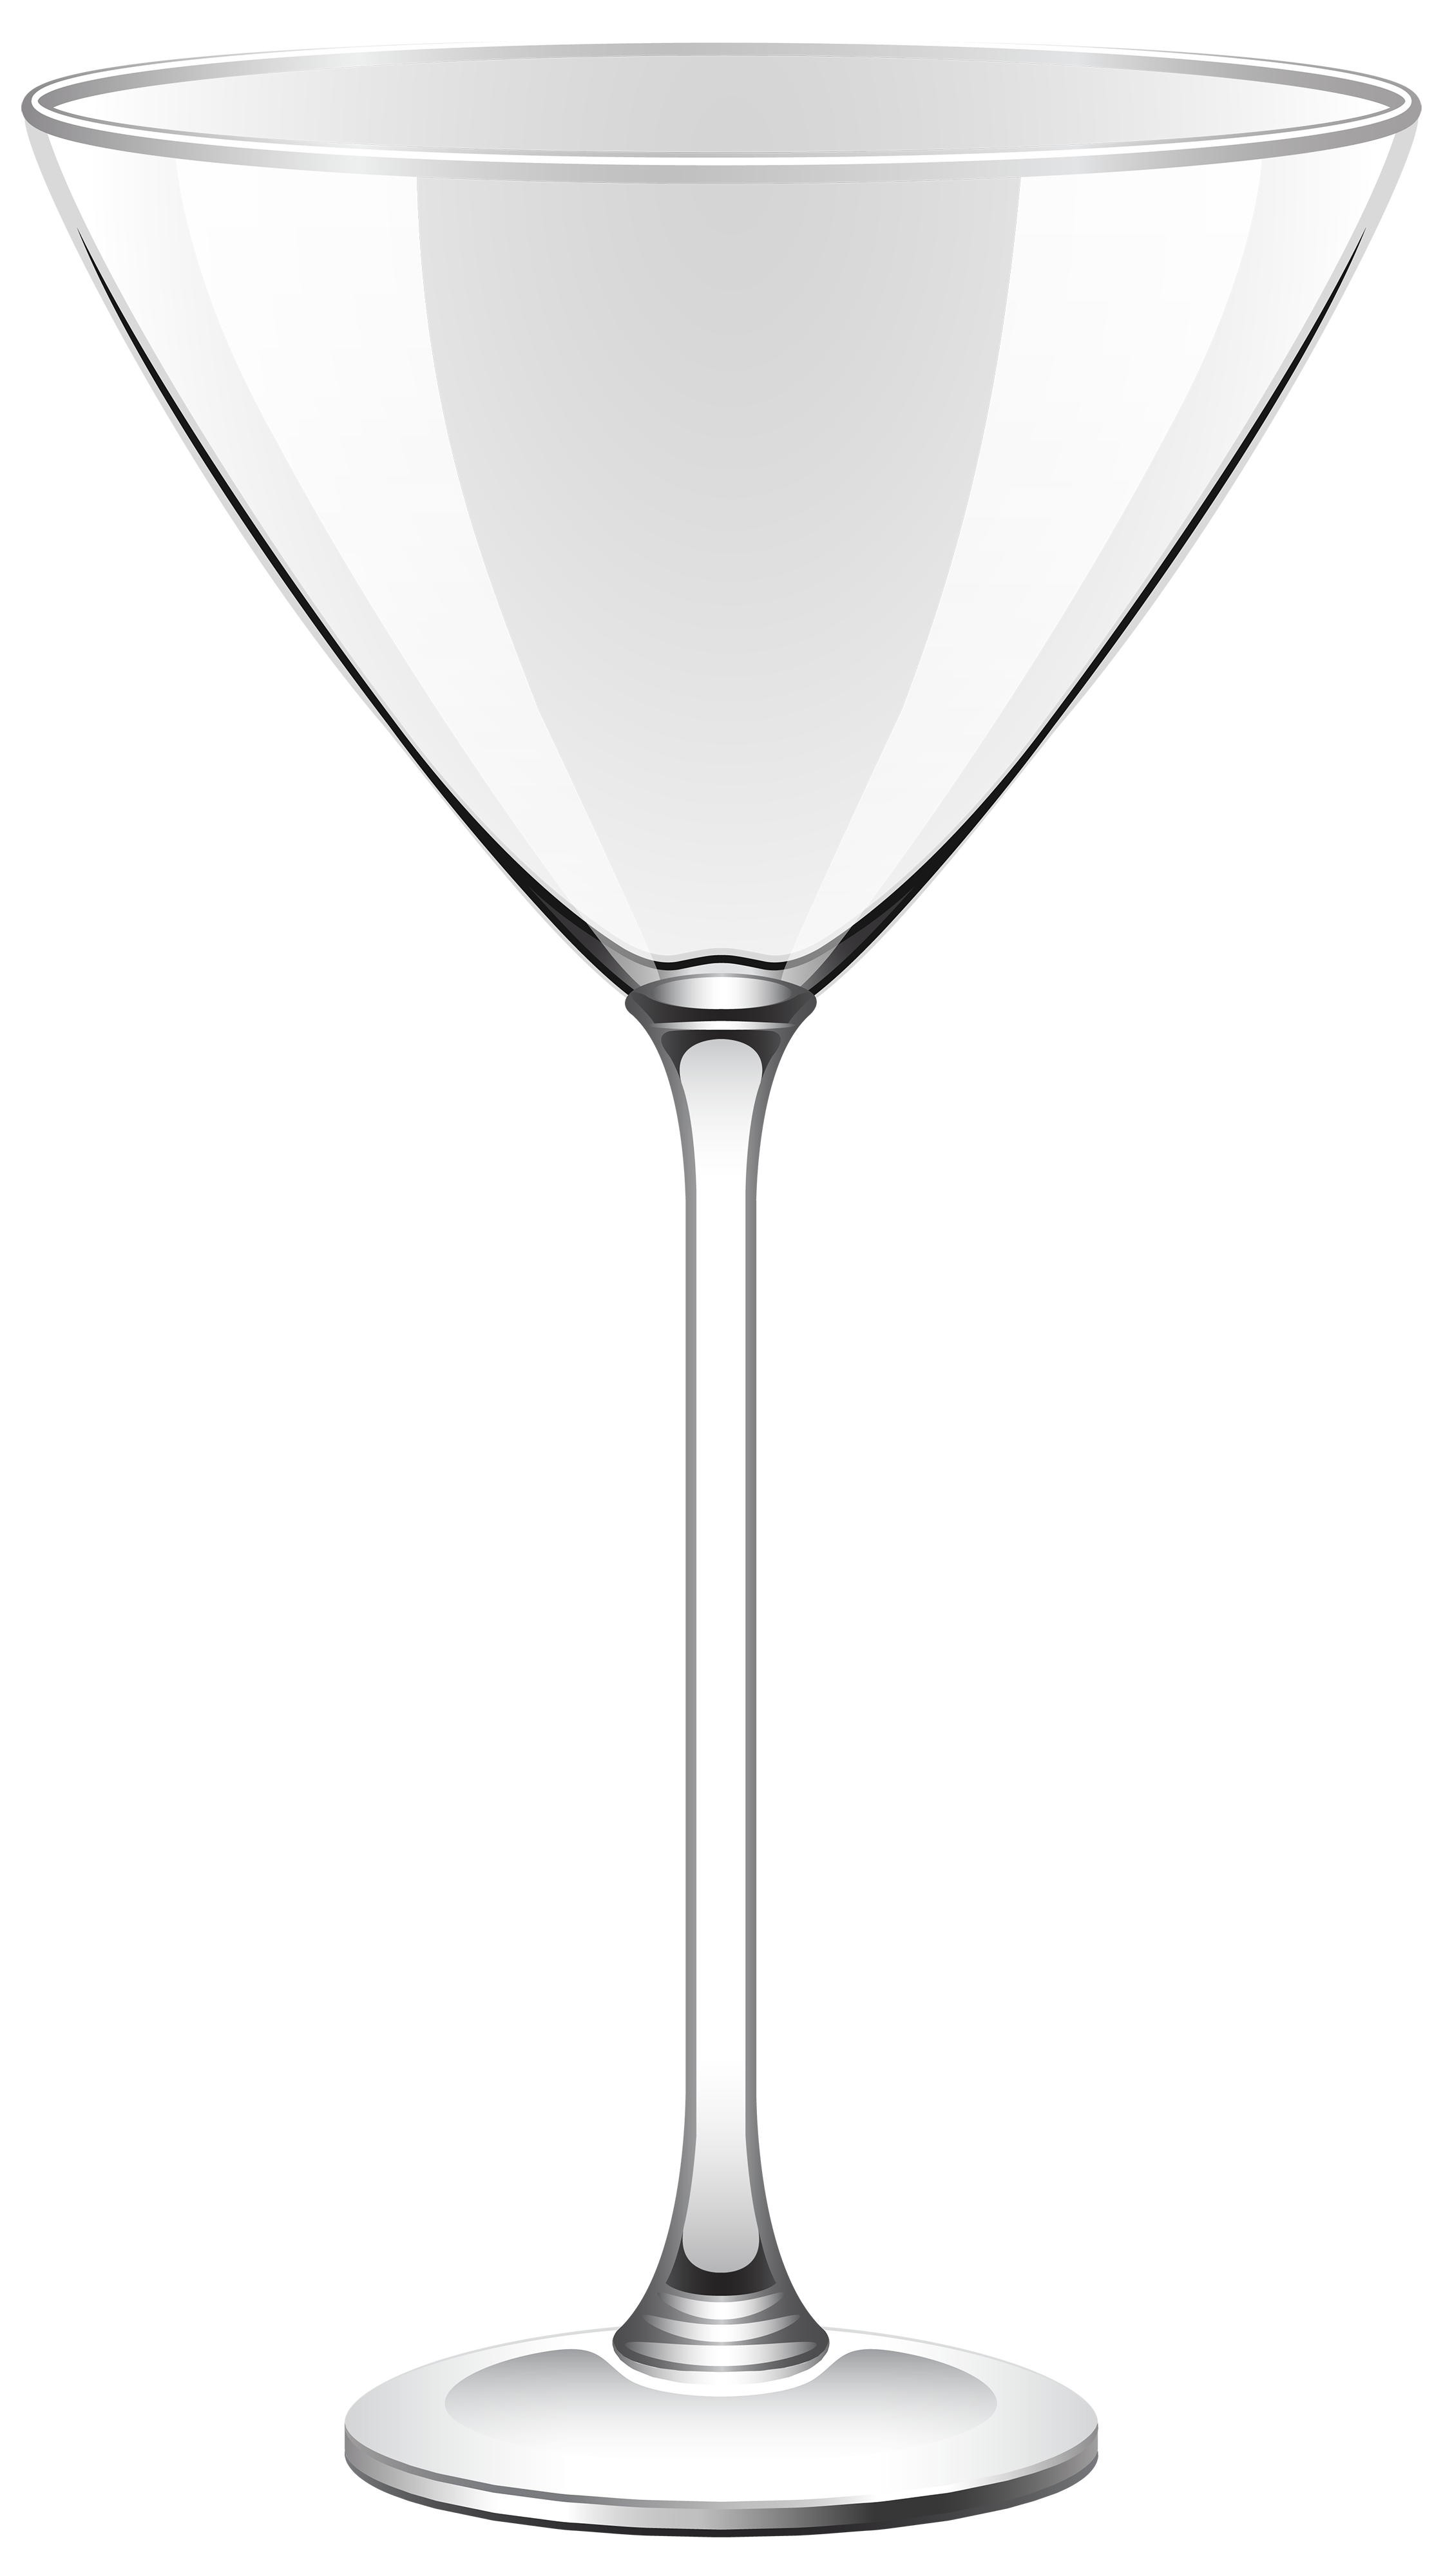 free clipart images martini glass - photo #46